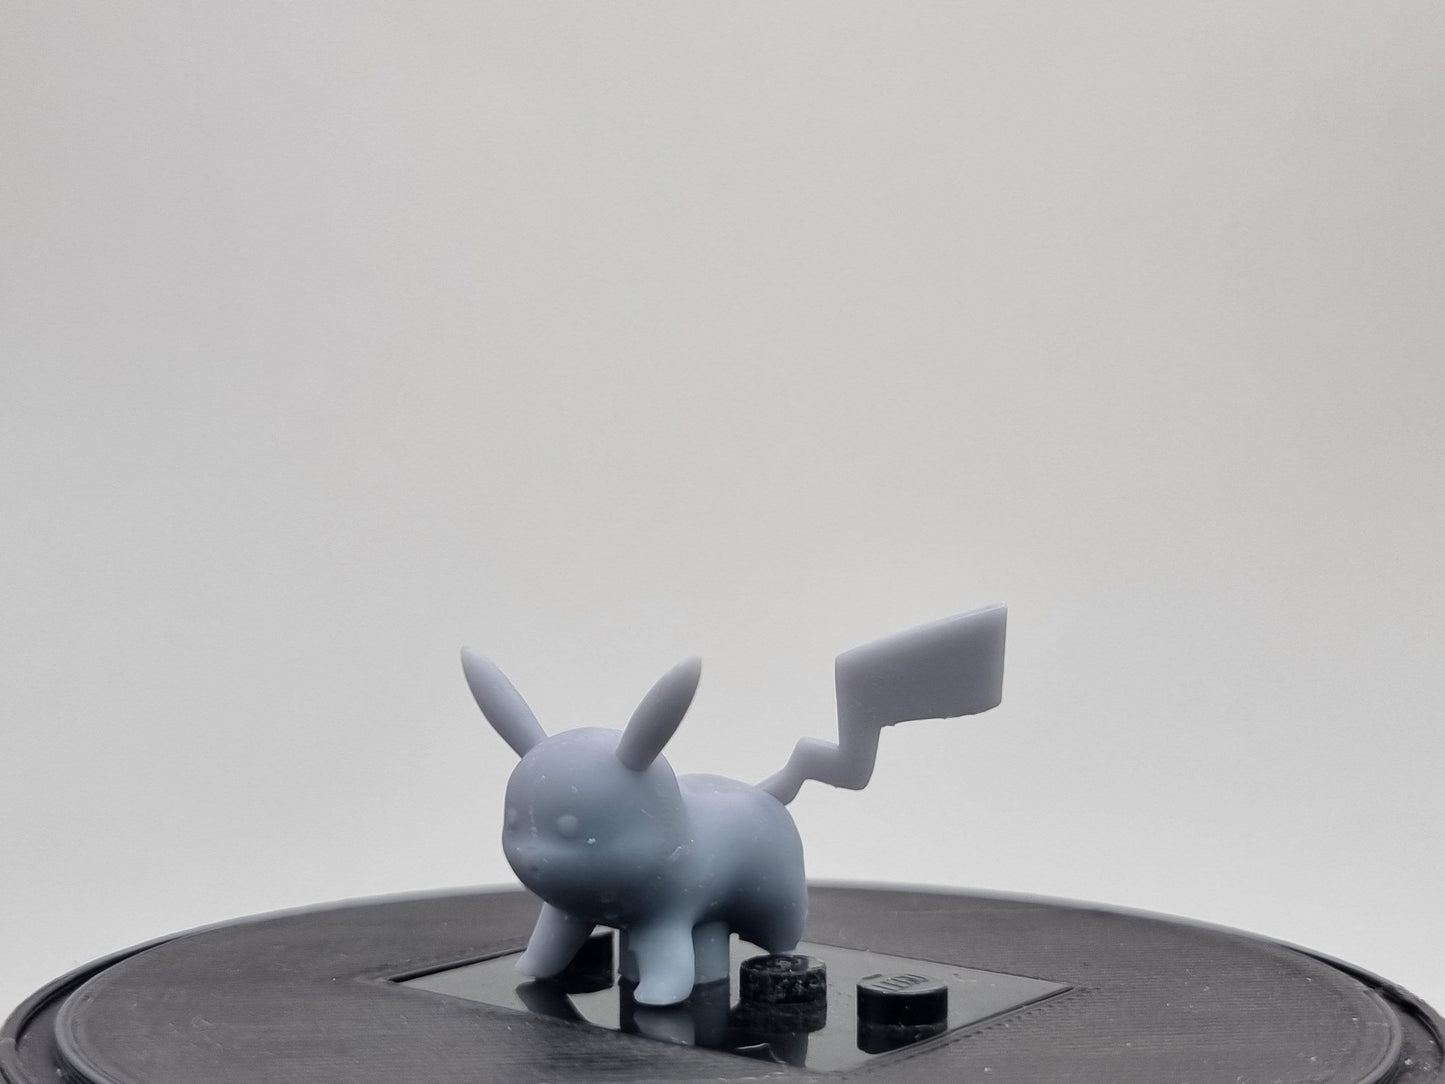 Building toy custom 3D printed electric animal to catch!